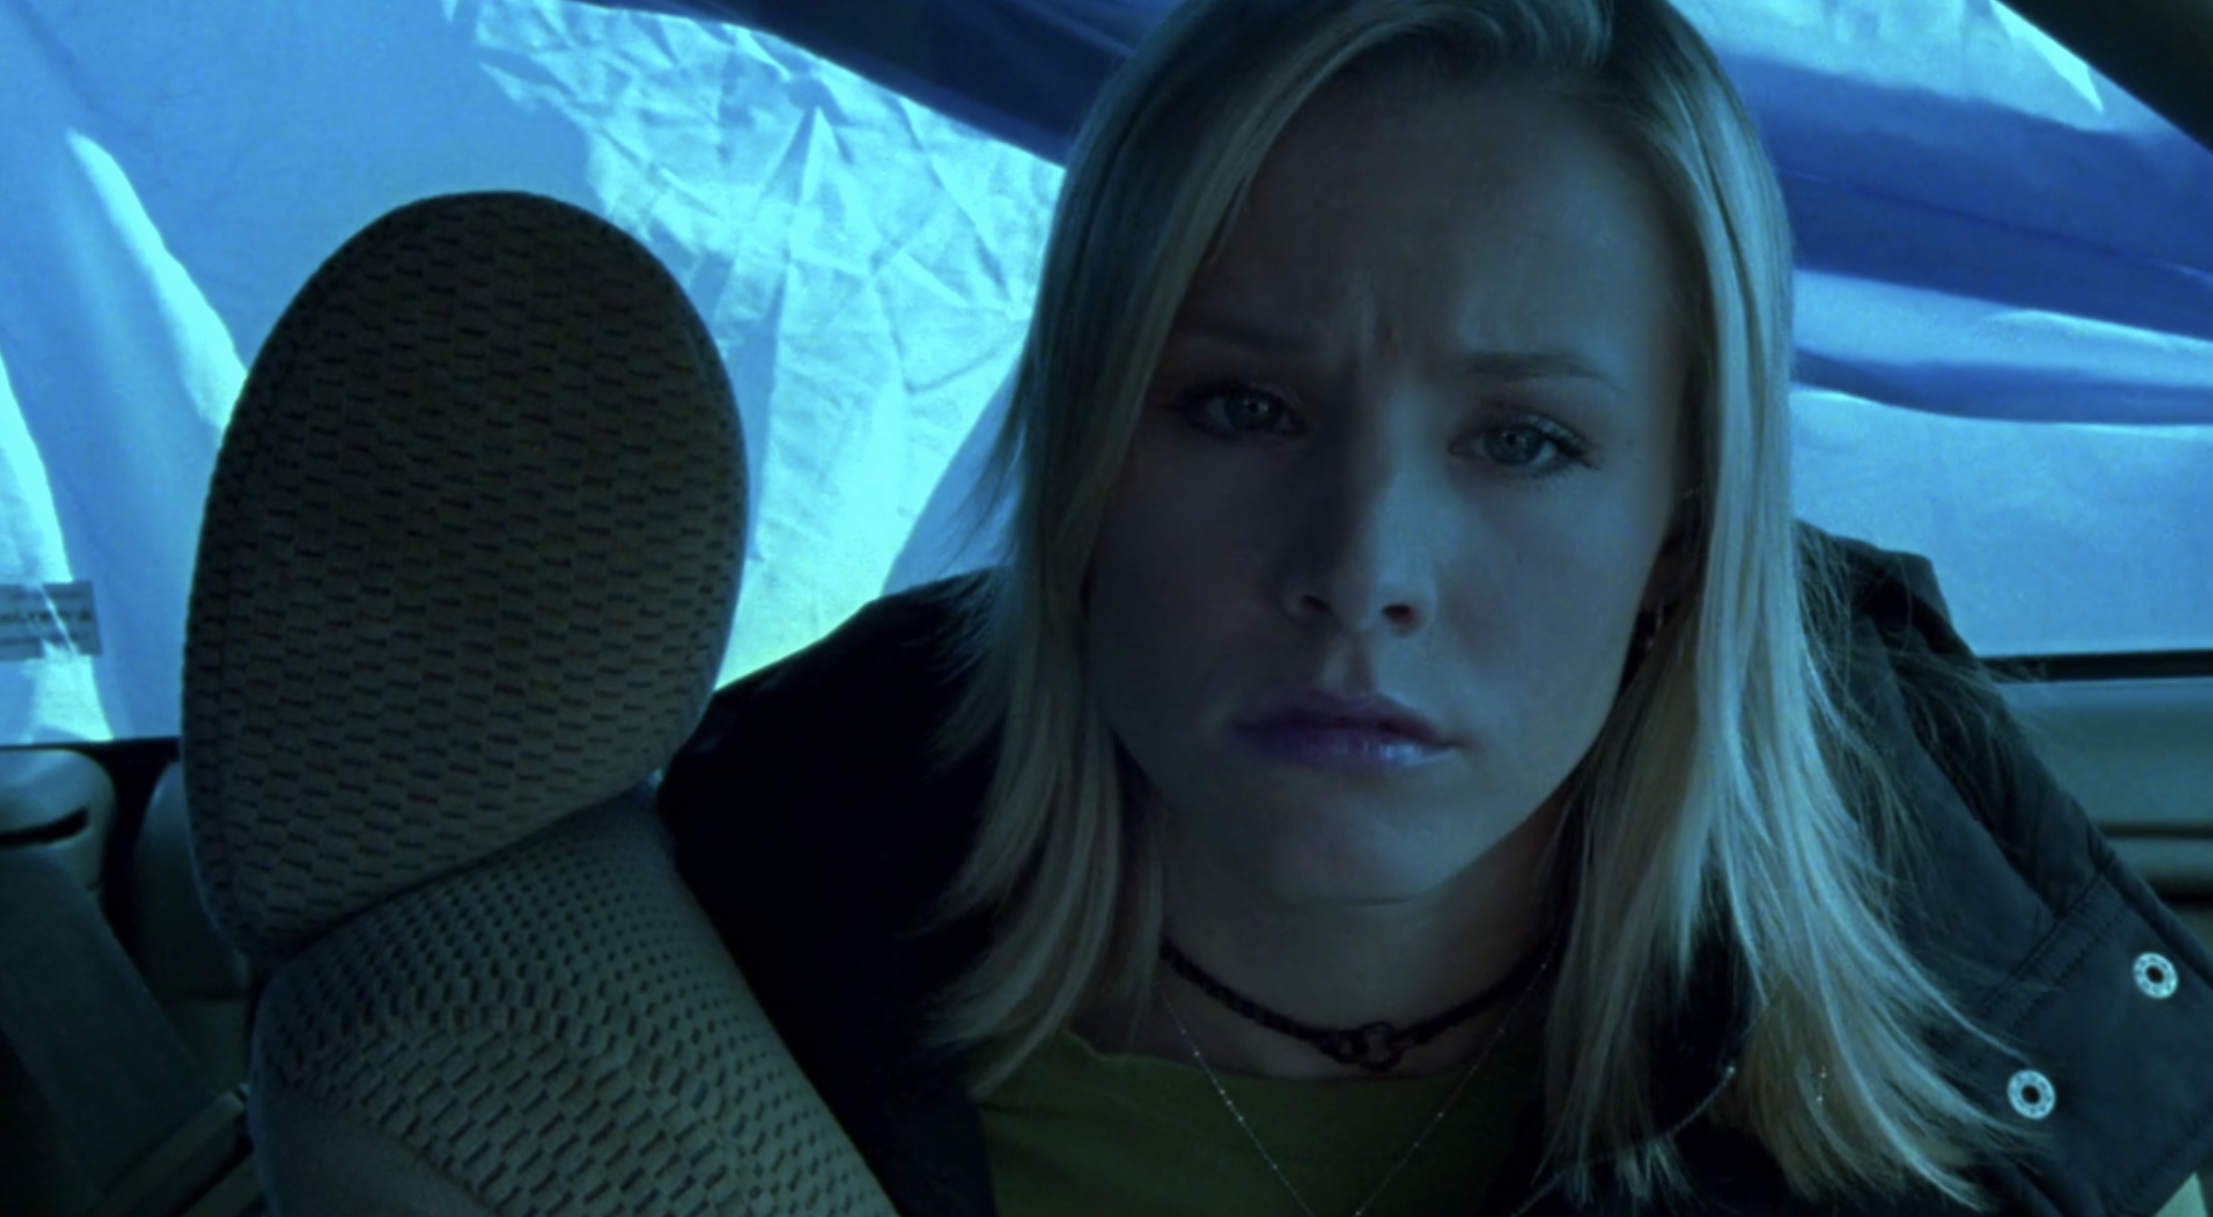 Screenshot from S1E12 of Veronica Mars. Veronica is in her car which is draped in blue cloth so everything is washed in blue light. She looks sad and concerned.